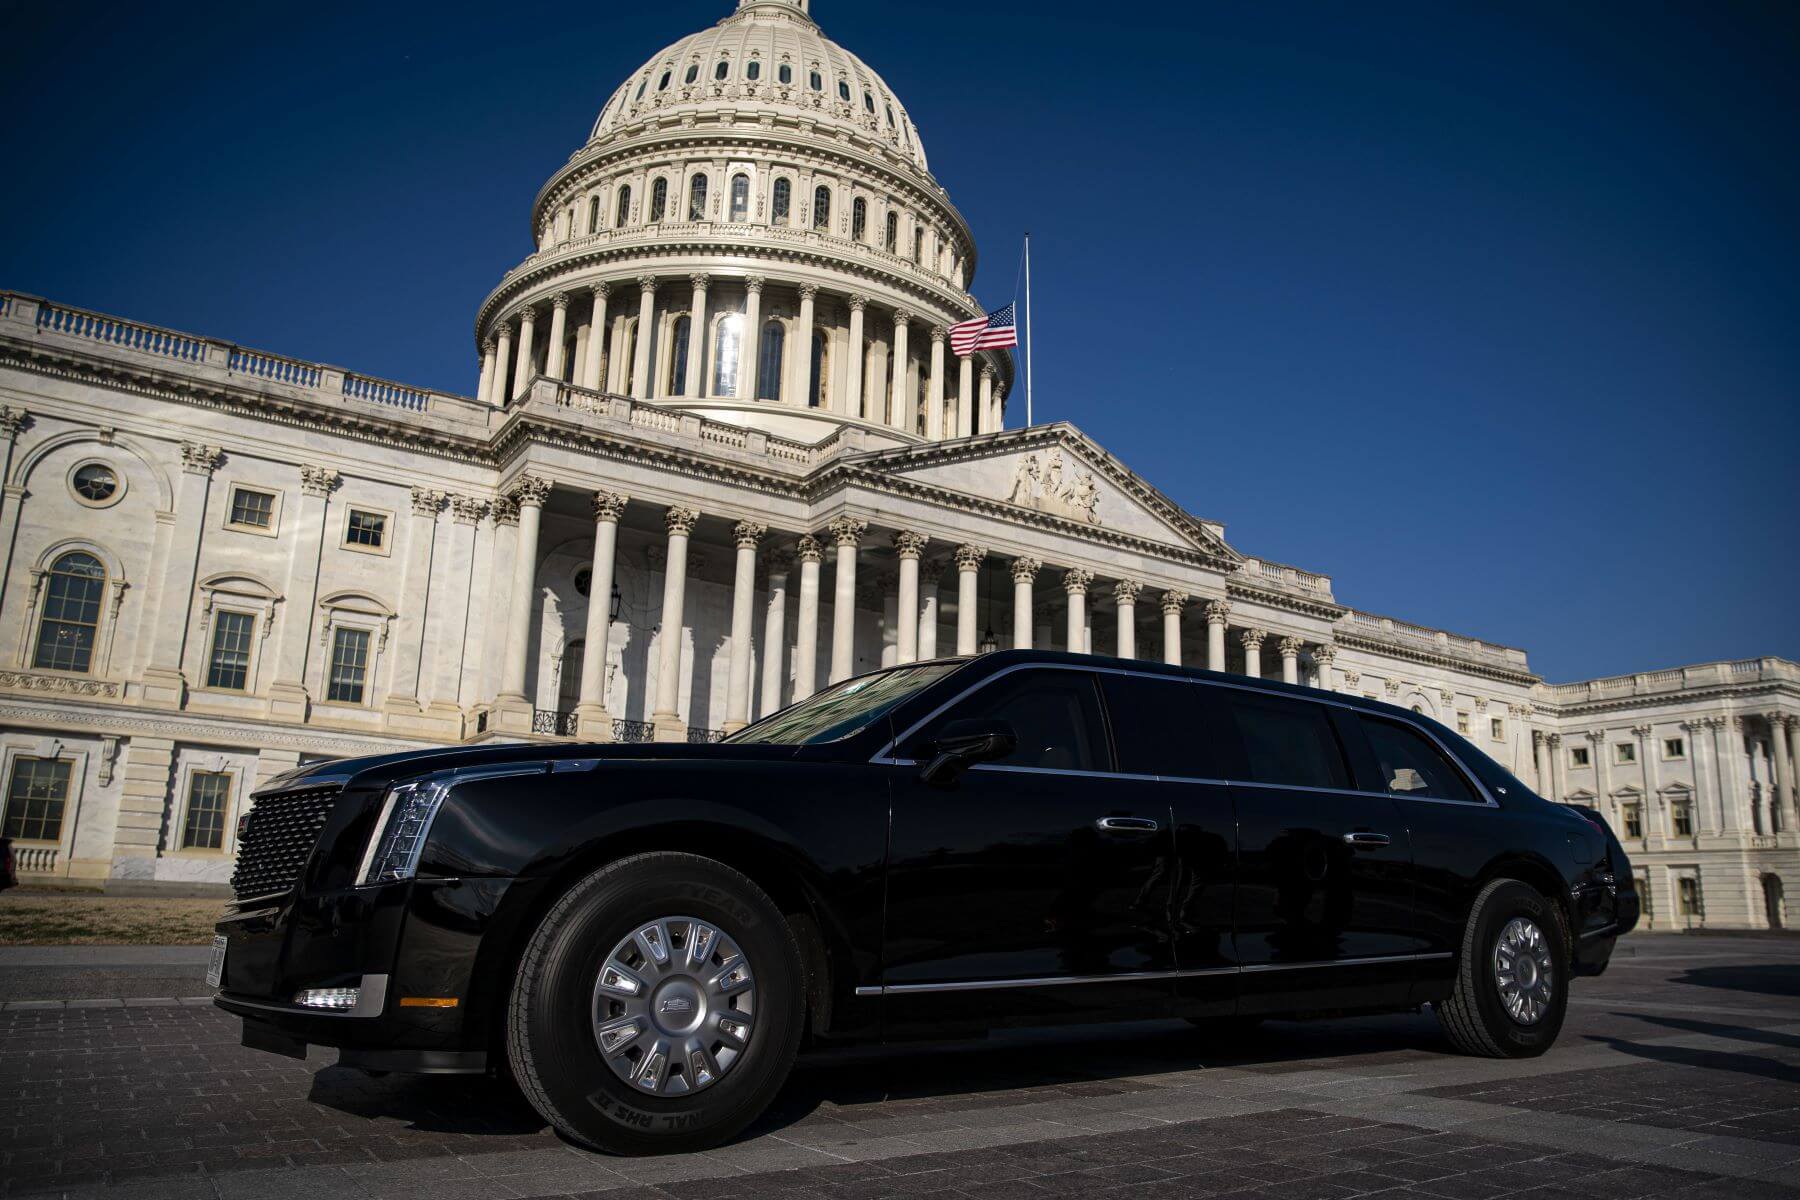 The Presidential Cadillac limousine parked in front of the U.S. Capitol in Washington, D.C.